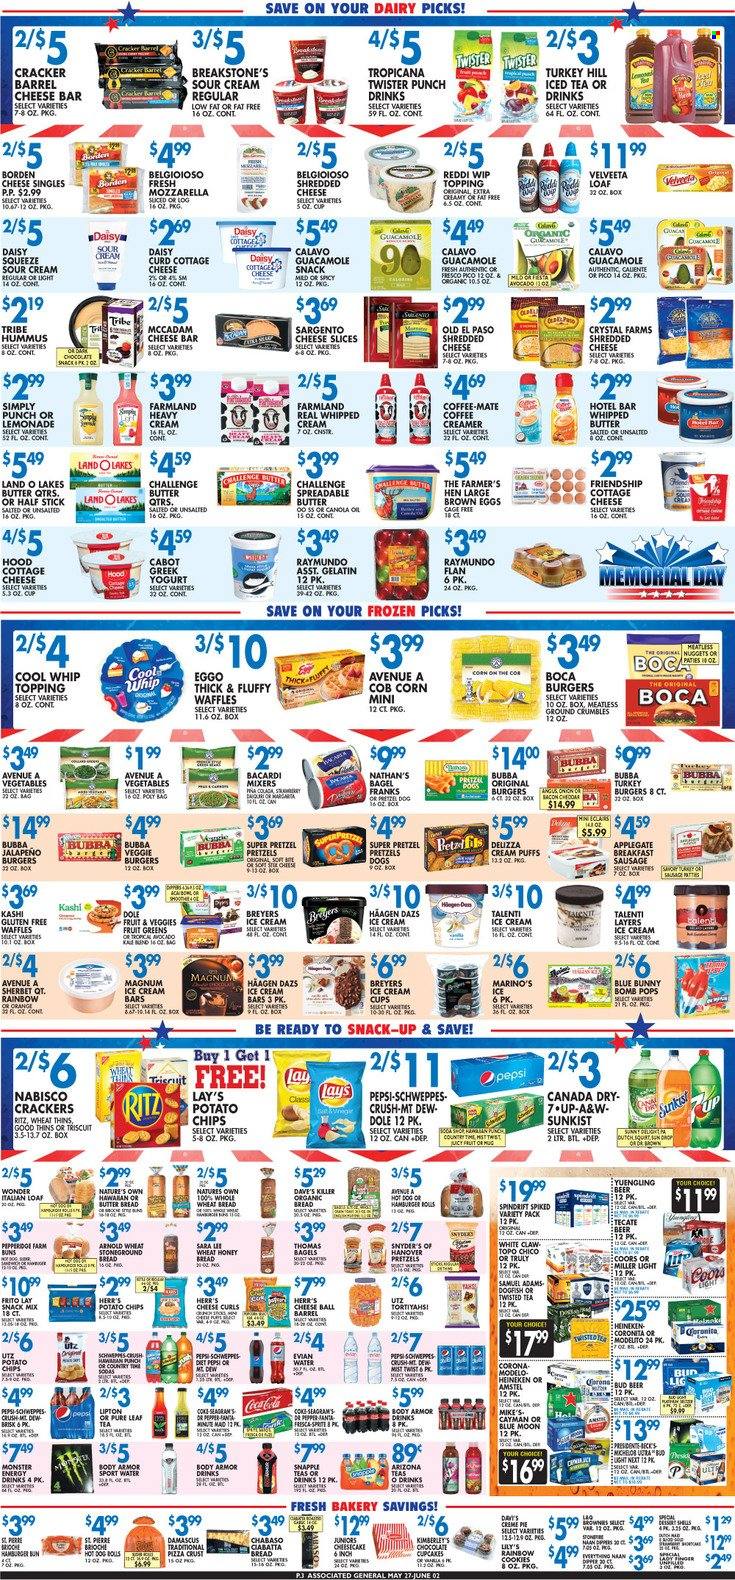 thumbnail - Associated Supermarkets Flyer - 05/27/2022 - 06/02/2022 - Sales products - bagels, ciabatta, wheat bread, pretzels, pie, buns, Old El Paso, burger buns, brioche, cupcake, puffs, waffles, cream puffs, corn, kale, onion, Dole, jalapeño, oranges, hot dog, pizza, nuggets, veggie burger, bacon, sausage, hummus, guacamole, cottage cheese, shredded cheese, sliced cheese, curd, Sargento, greek yoghurt, Coffee-Mate, eggs, cage free eggs, spreadable butter, Cool Whip, sour cream, whipped cream, creamer, ice cream, ice cream bars, Häagen-Dazs, Talenti Gelato, Blue Bunny, SuperPretzel, cookies, snack, crackers, dark chocolate, RITZ, potato chips, Lay’s, Thins, topping, canola oil, oil, honey, Canada Dry, Coca-Cola, lemonade, Schweppes, Sprite, Pepsi, Fanta, Body Armor, energy drink, Monster, Lipton, ice tea, Diet Pepsi, Monster Energy, AriZona, Snapple, A&W, Tropicana Twister, Spindrift, Evian, Pure Leaf, Bacardi, punch, White Claw, TRULY, beer, Corona Extra, Heineken, Miller, Beck's, Sol, Modelo, turkey burger, bowl, gelatin, Nature's Own, Coors, Blue Moon, Twisted Tea. Page 3.